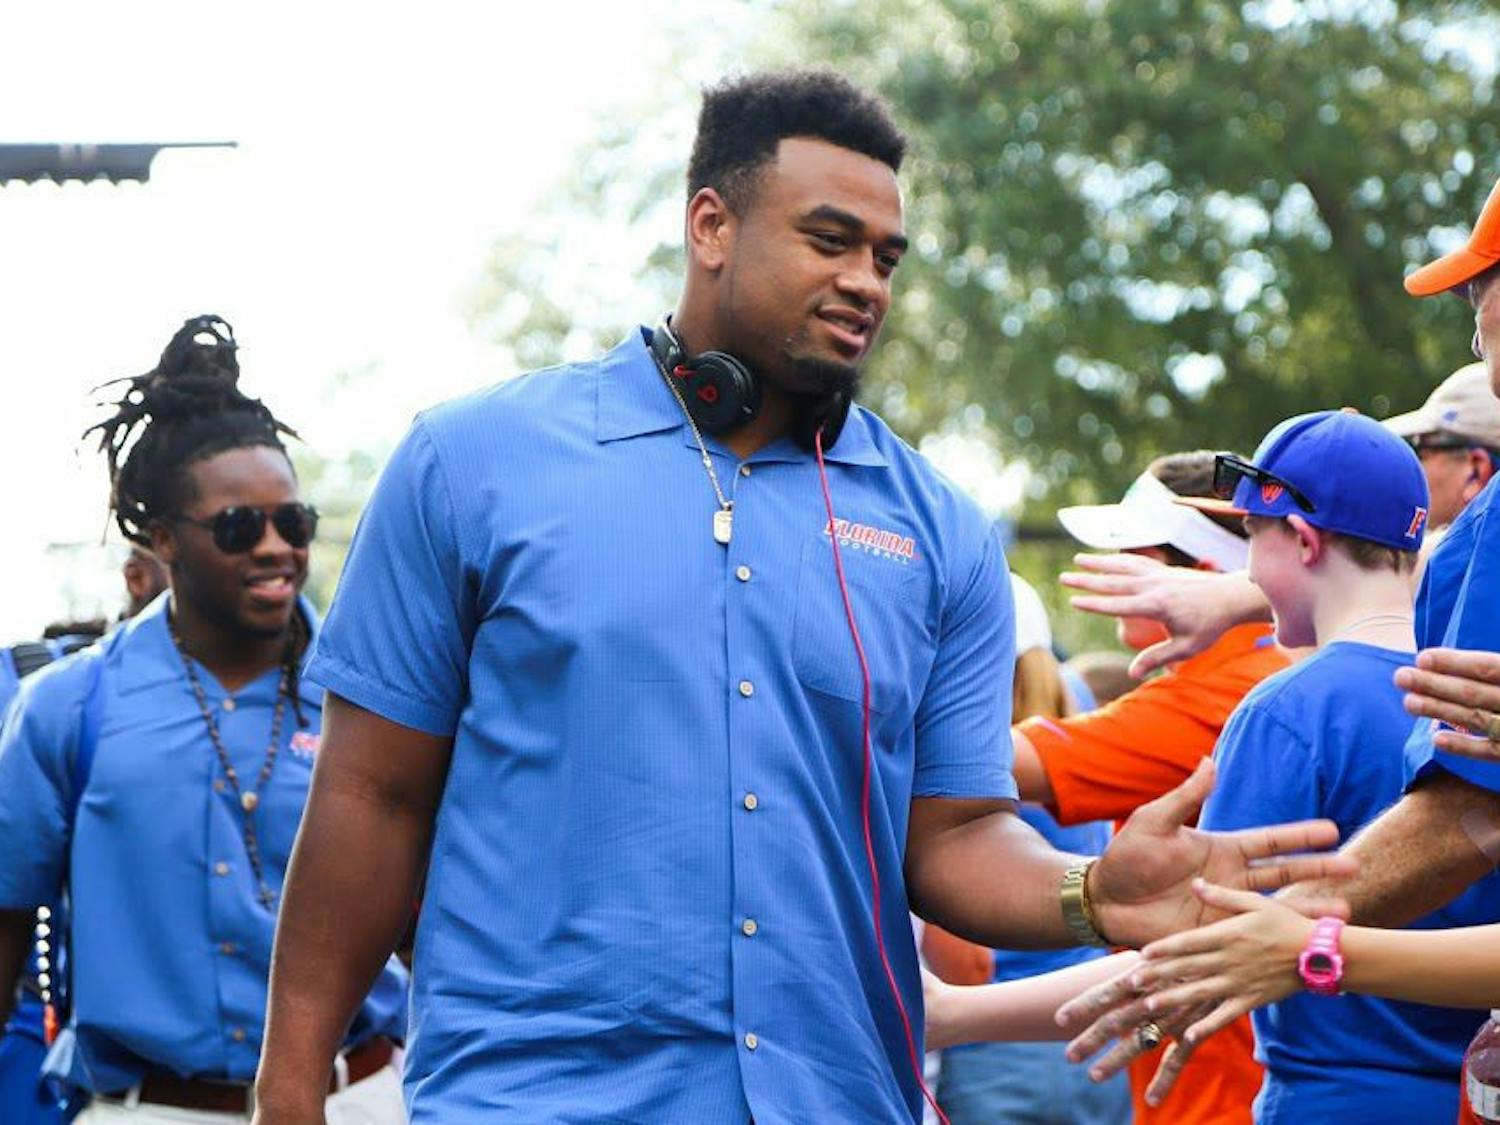 Former UF defensive lineman Caleb Brantley greets fans prior to Florida's 32-0 win over North Texas on Sept. 17, 2016, at Ben Hill Griffin Stadium.